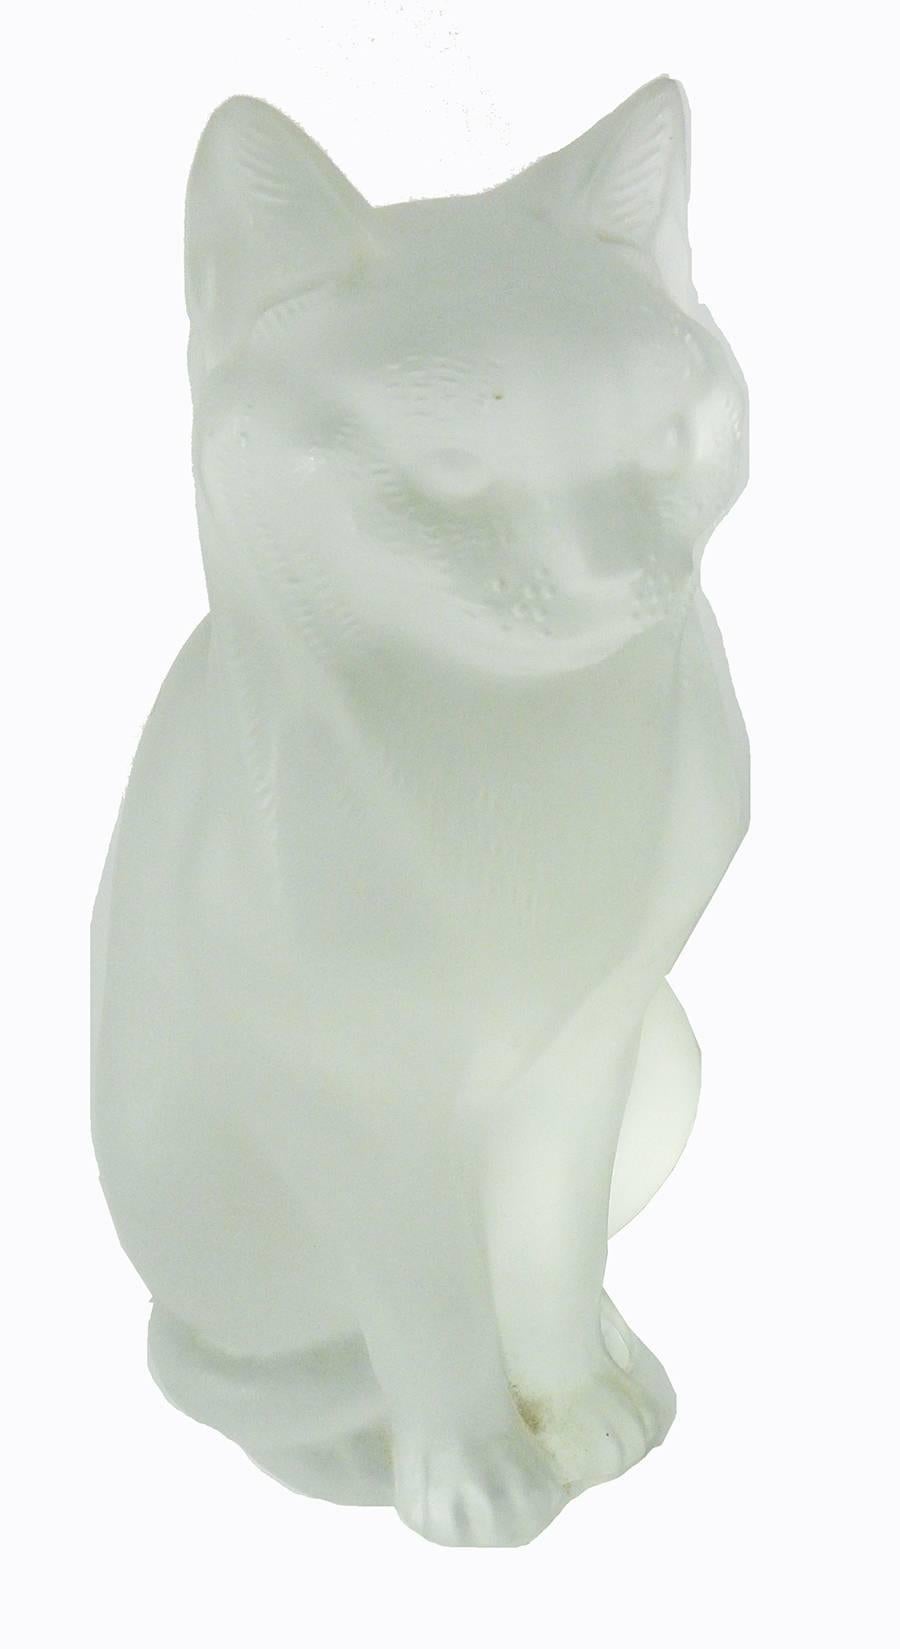 French Lalique Art Deco figure of a cat, called Chat Assis, the cat facing forward with ears pricked up, the tail delicately wound toward the right back. The model first designed during the Art Deco period of the 1930s, but so popular as to still be